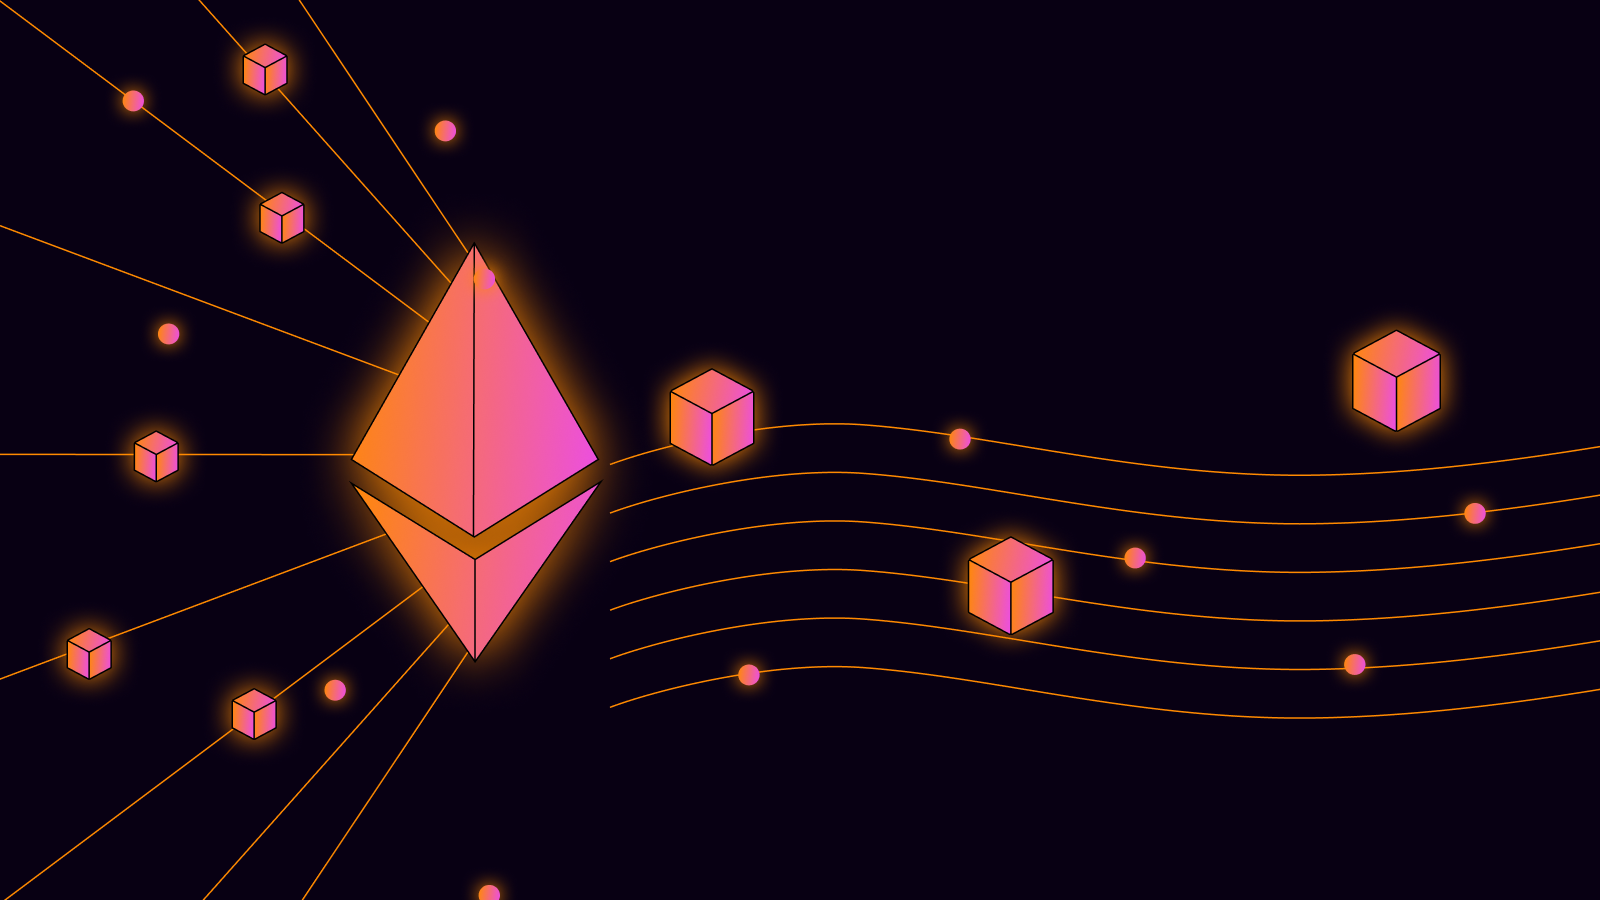 What’s next for post-Merge Ethereum?